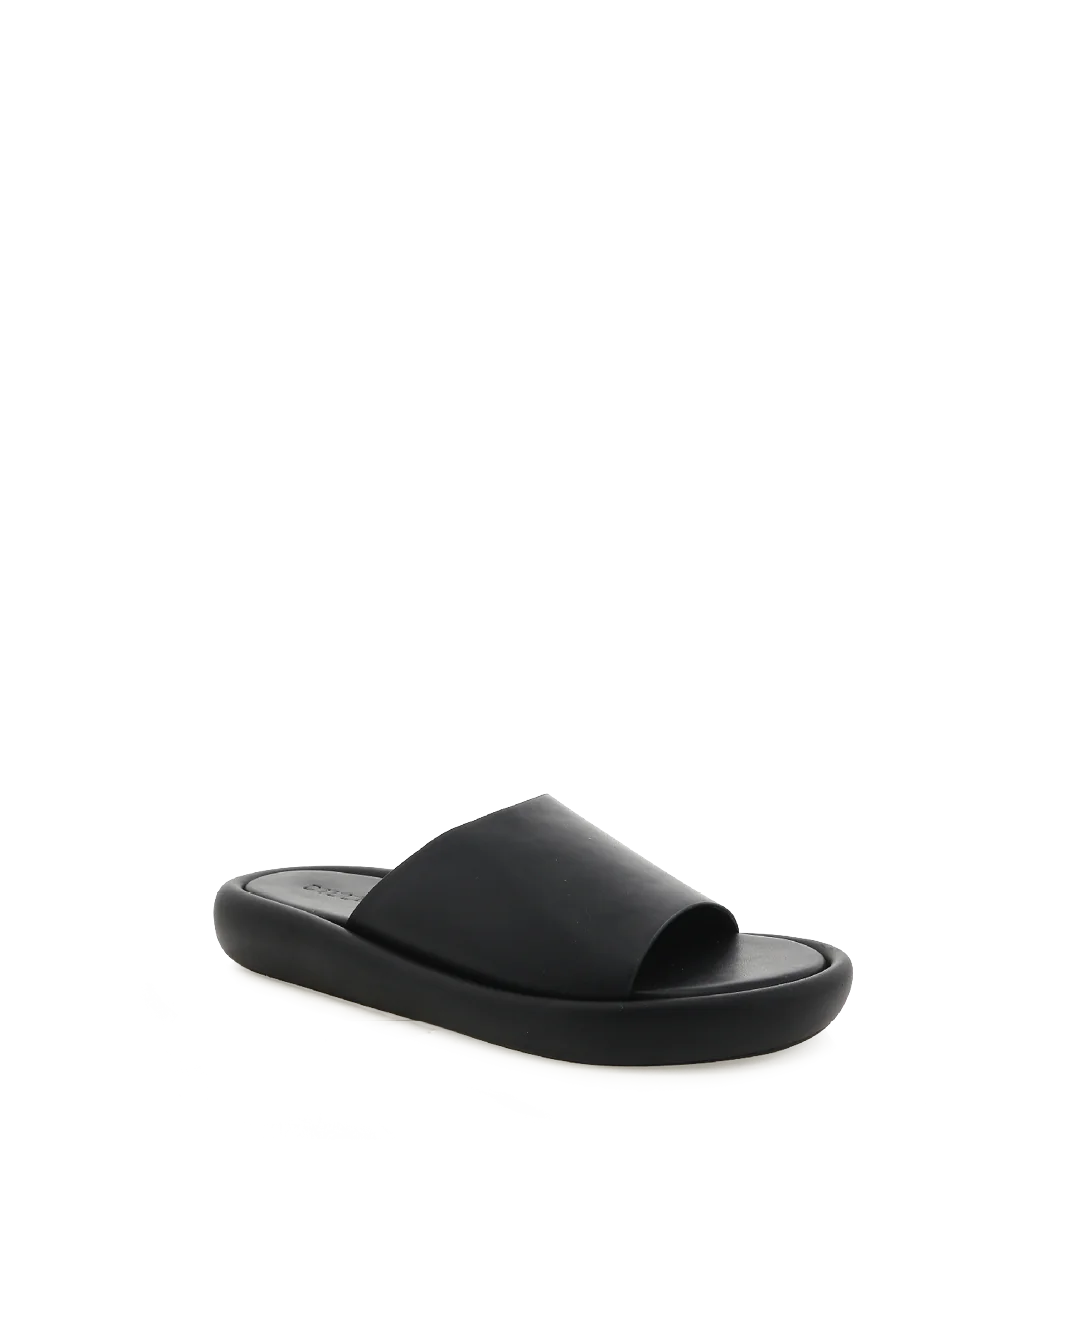 Nellie by Billini is a sleek contemporary slide. Take relaxed chic to a whole new level with this understated cool-girl slide.